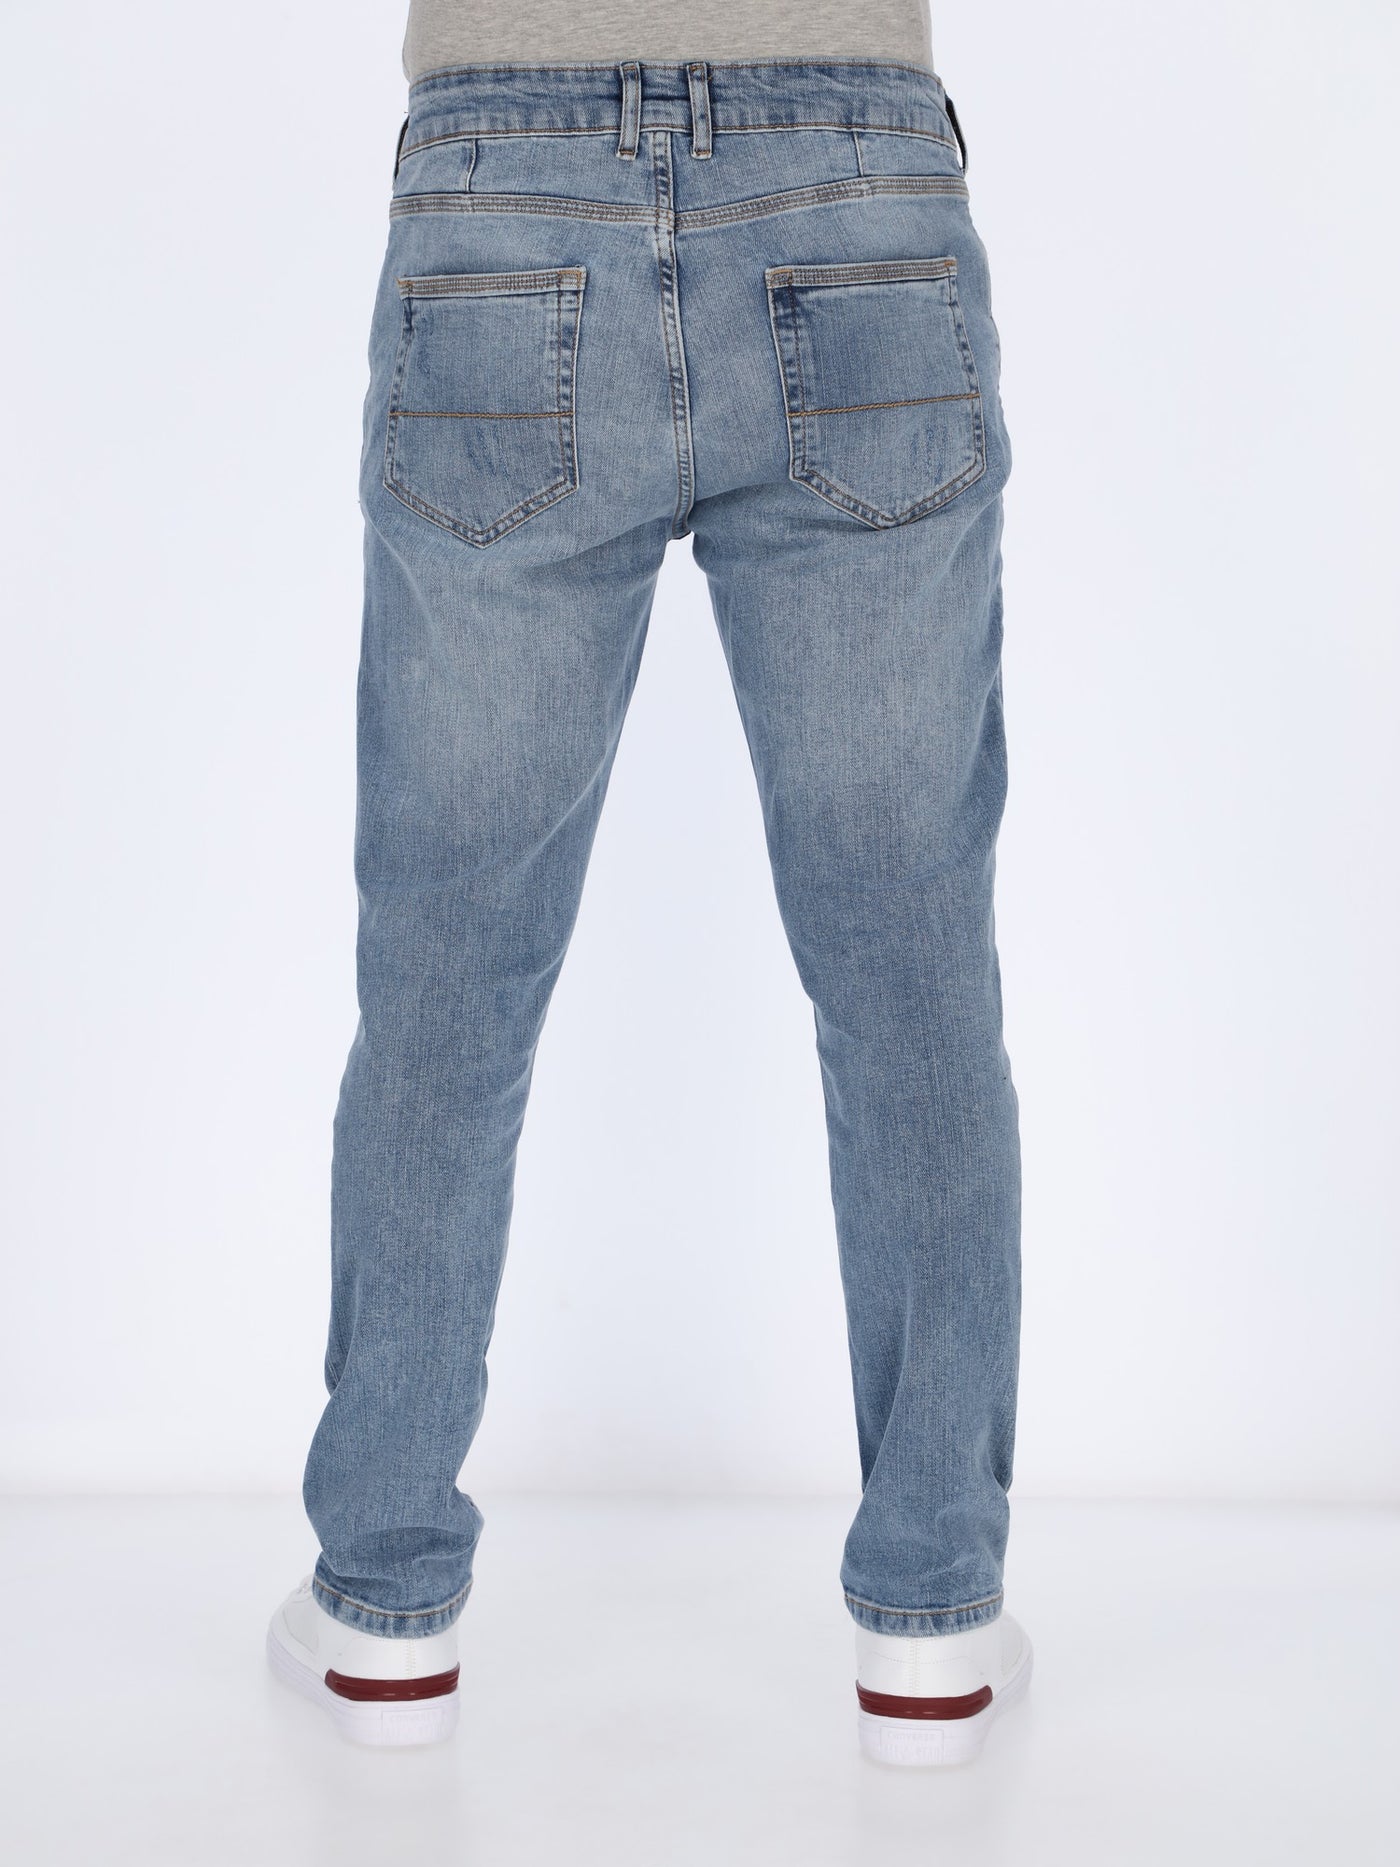 Slim Fit Jeans Pants with Rips